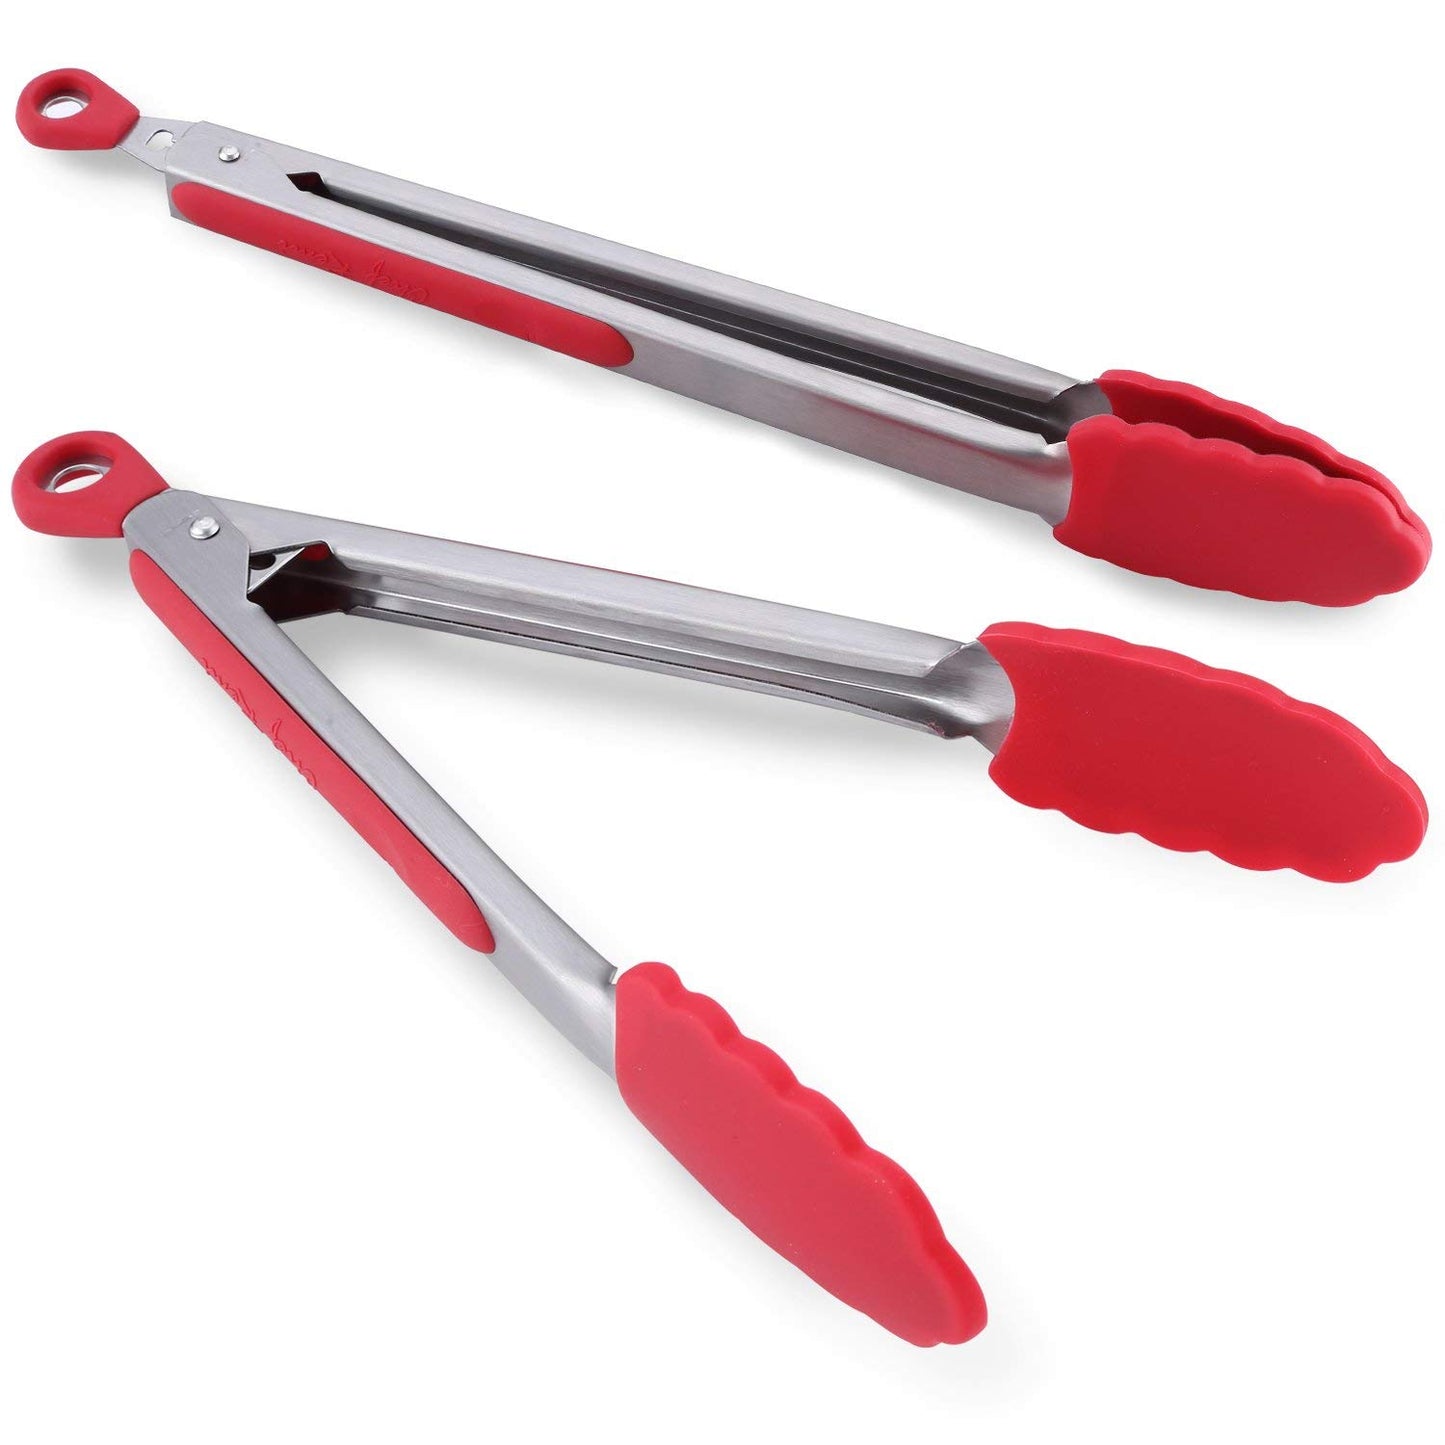 Premium Silicone Kitchen Tongs Heat Resistant Cooking BBQ Stainless Steel Handle